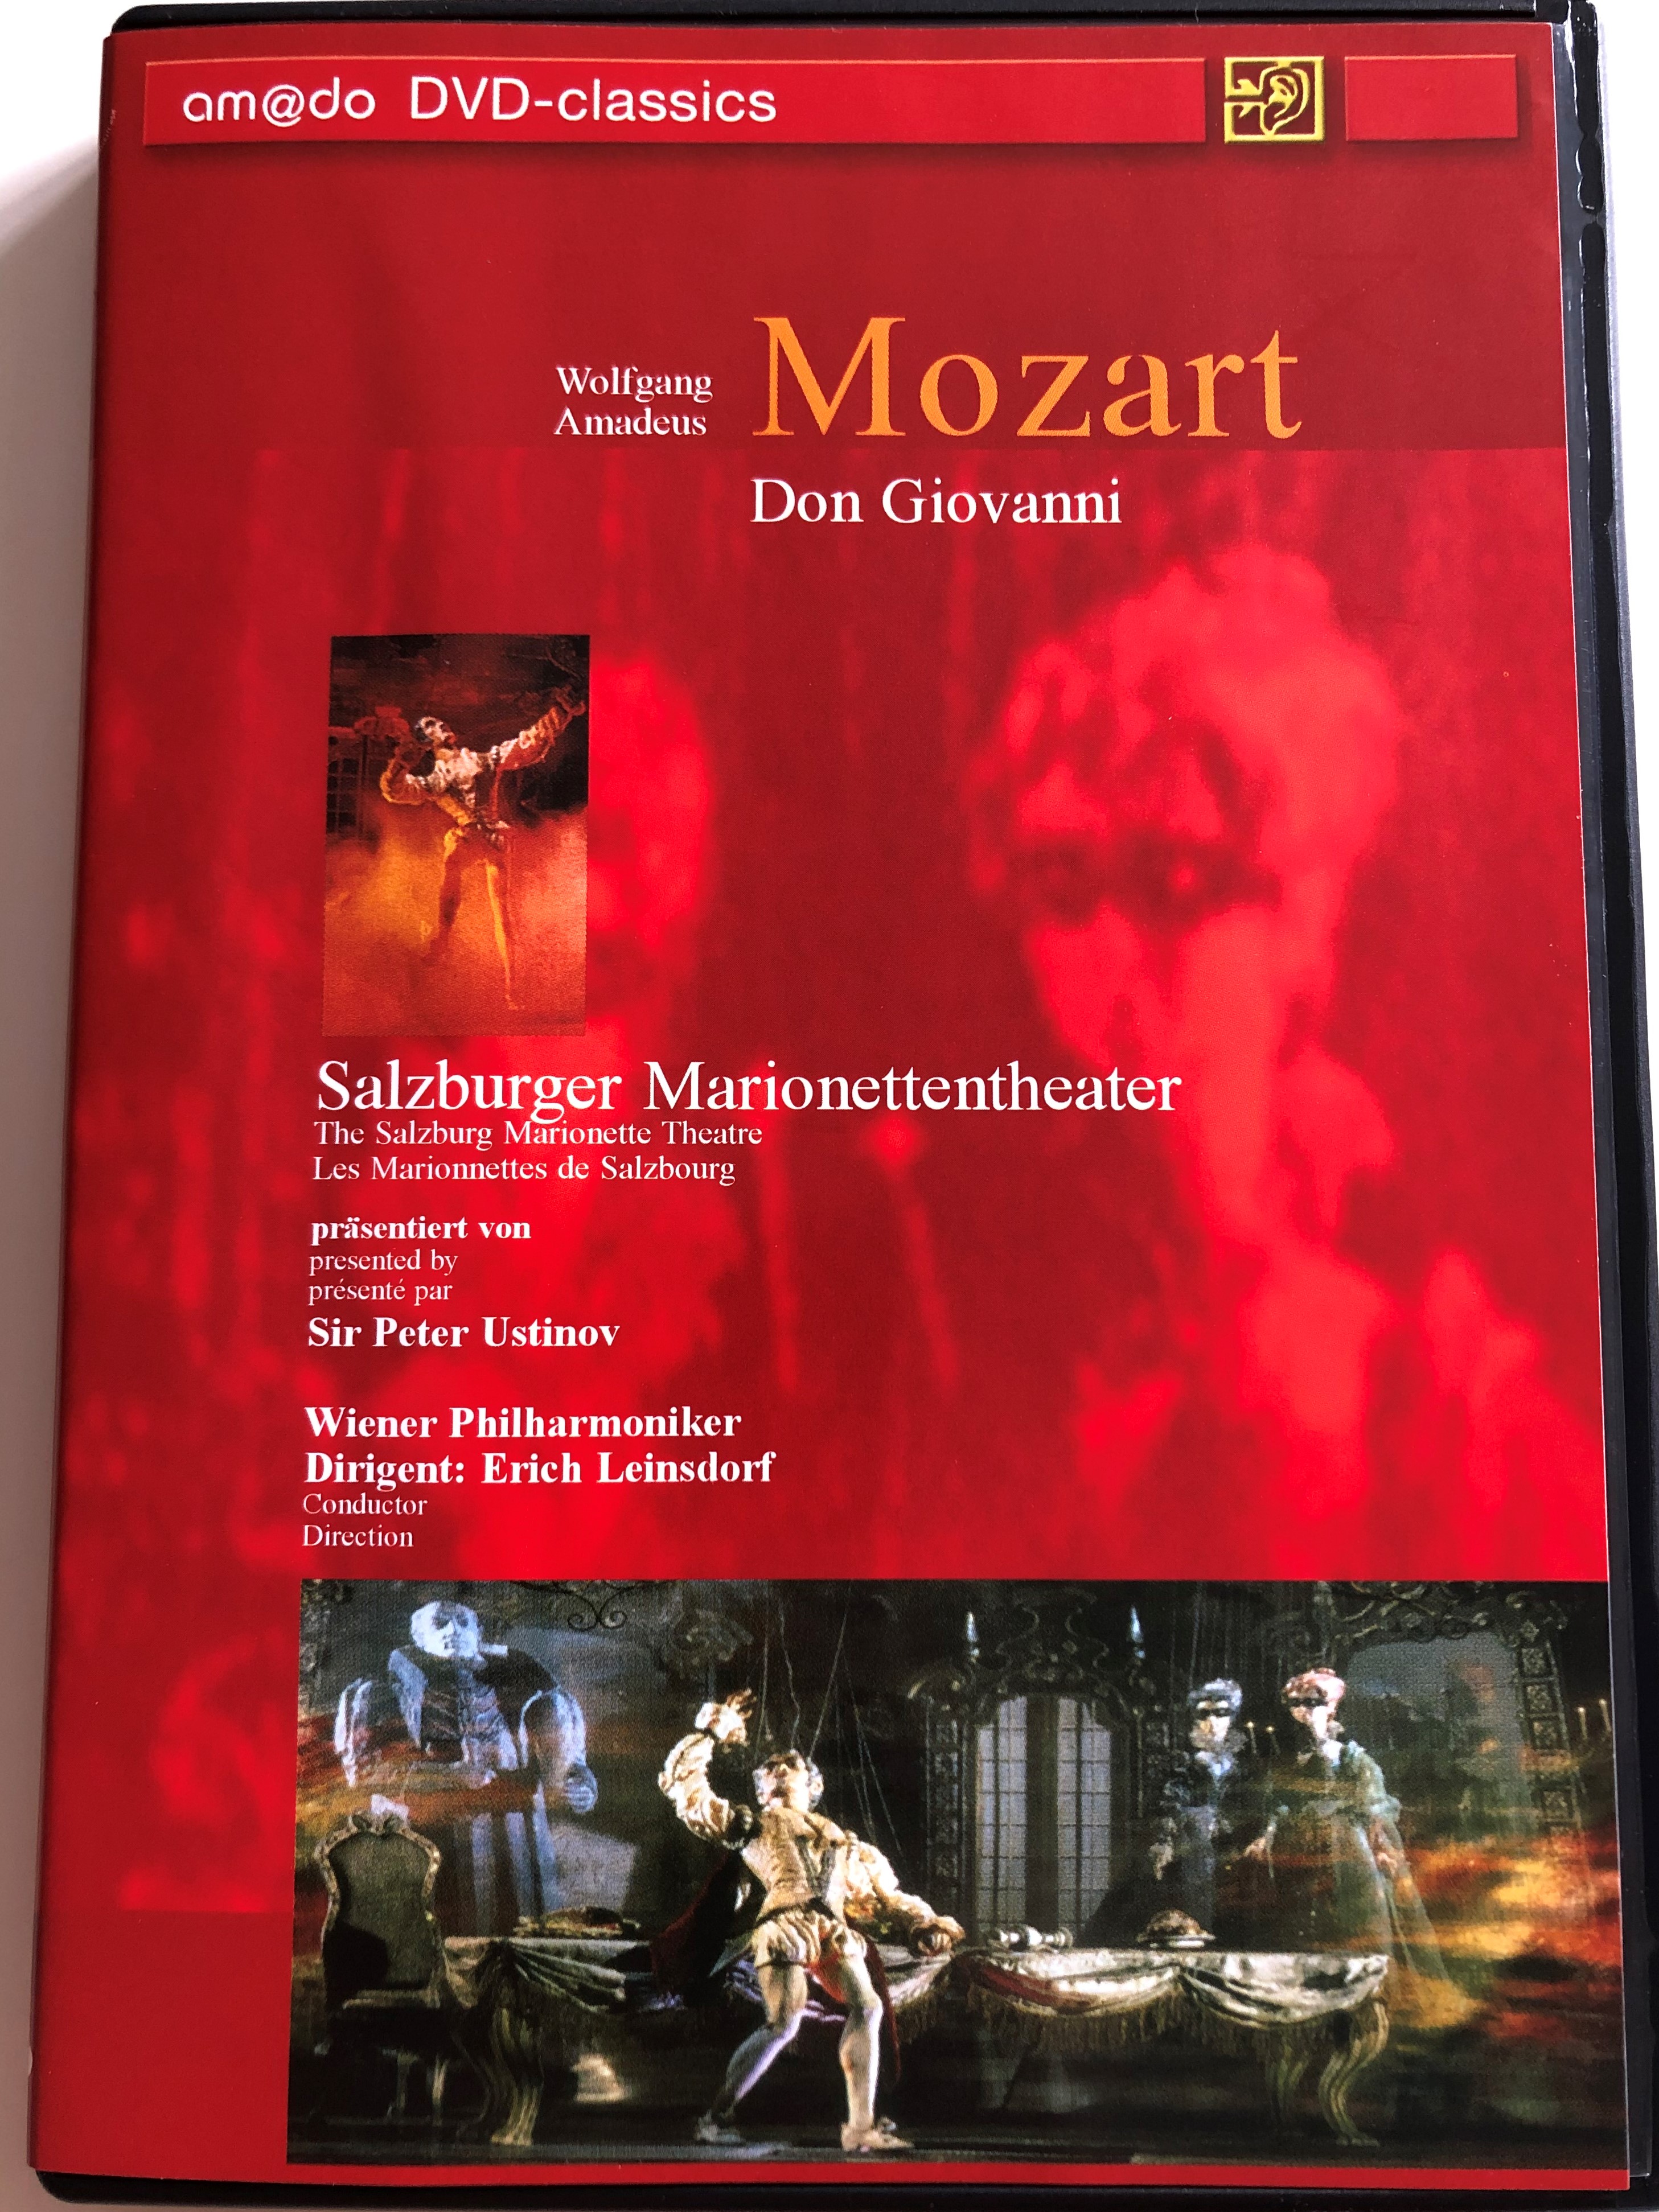 w.a.-mozart-don-giovanni-dvd-2003-directed-by-georg-w-bbolt-text-and-narration-by-sir-peter-ustinov-the-salzburg-marionette-theatre-wiener-philharmoniker-conducted-by-erich-leinsdorf-1-.jpg